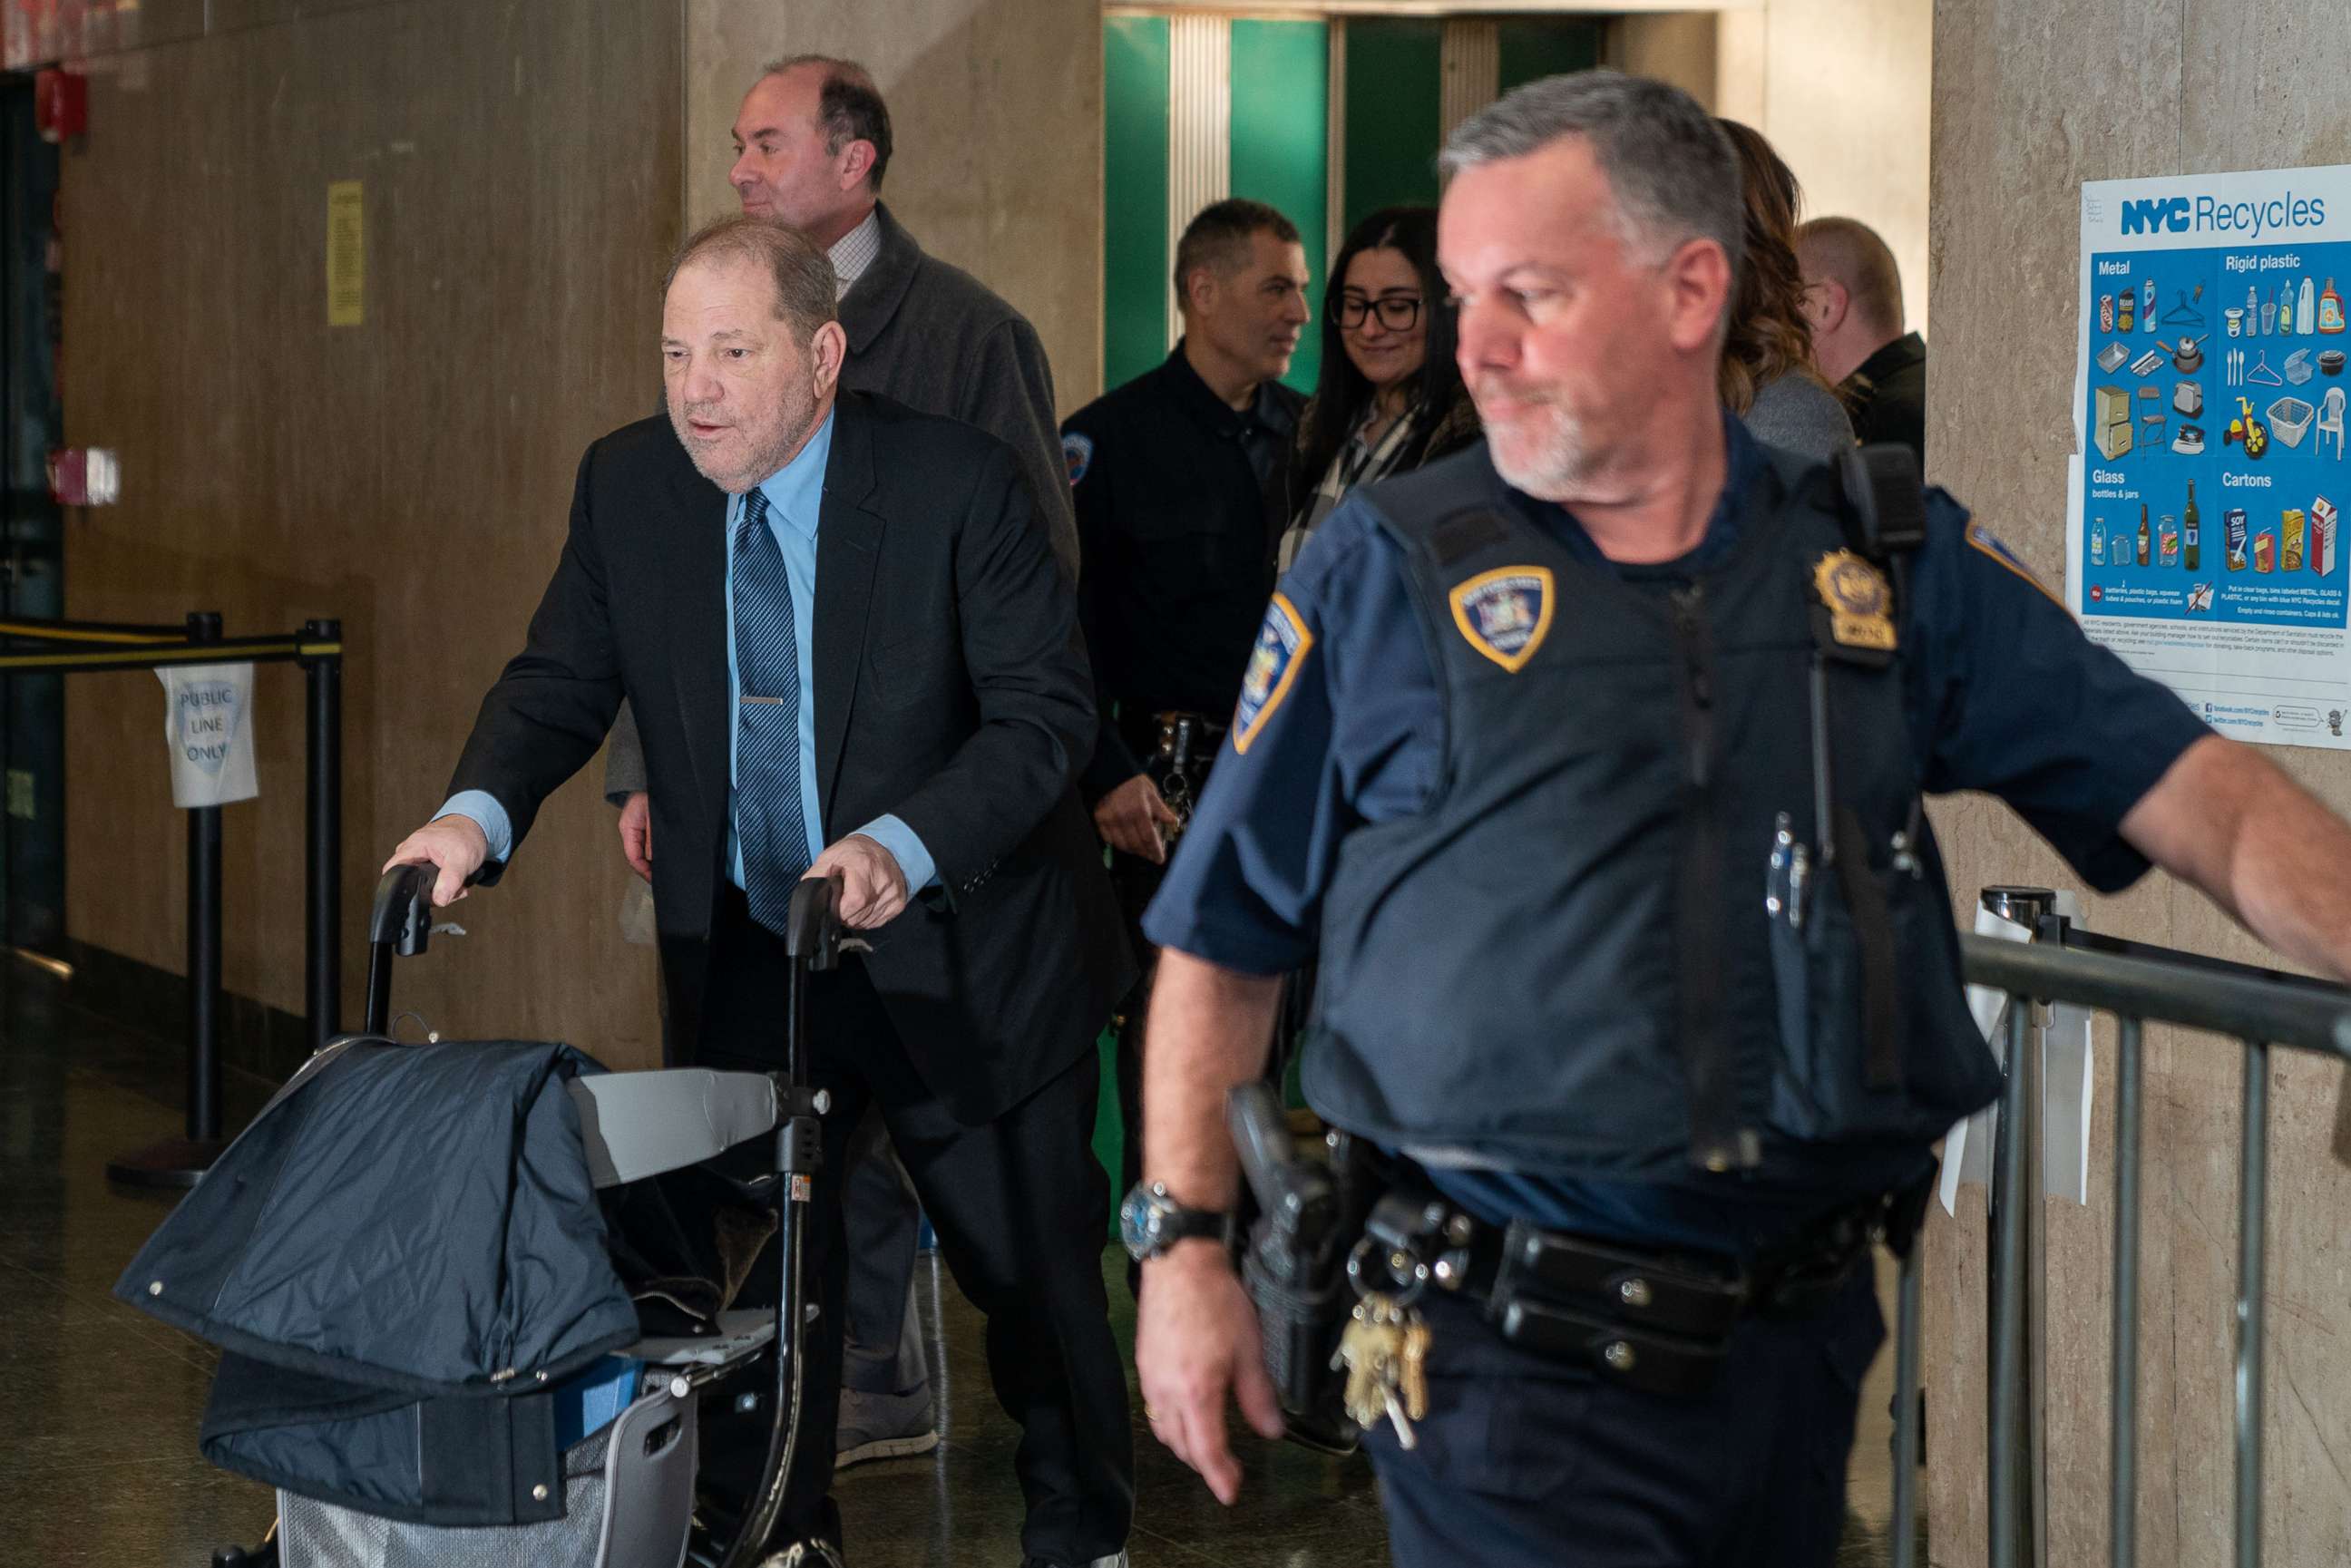 PHOTO: Harvey Weinstein arrives at Manhattan Criminal Court for his sexual assault trial on January 29, 2020 in New York.